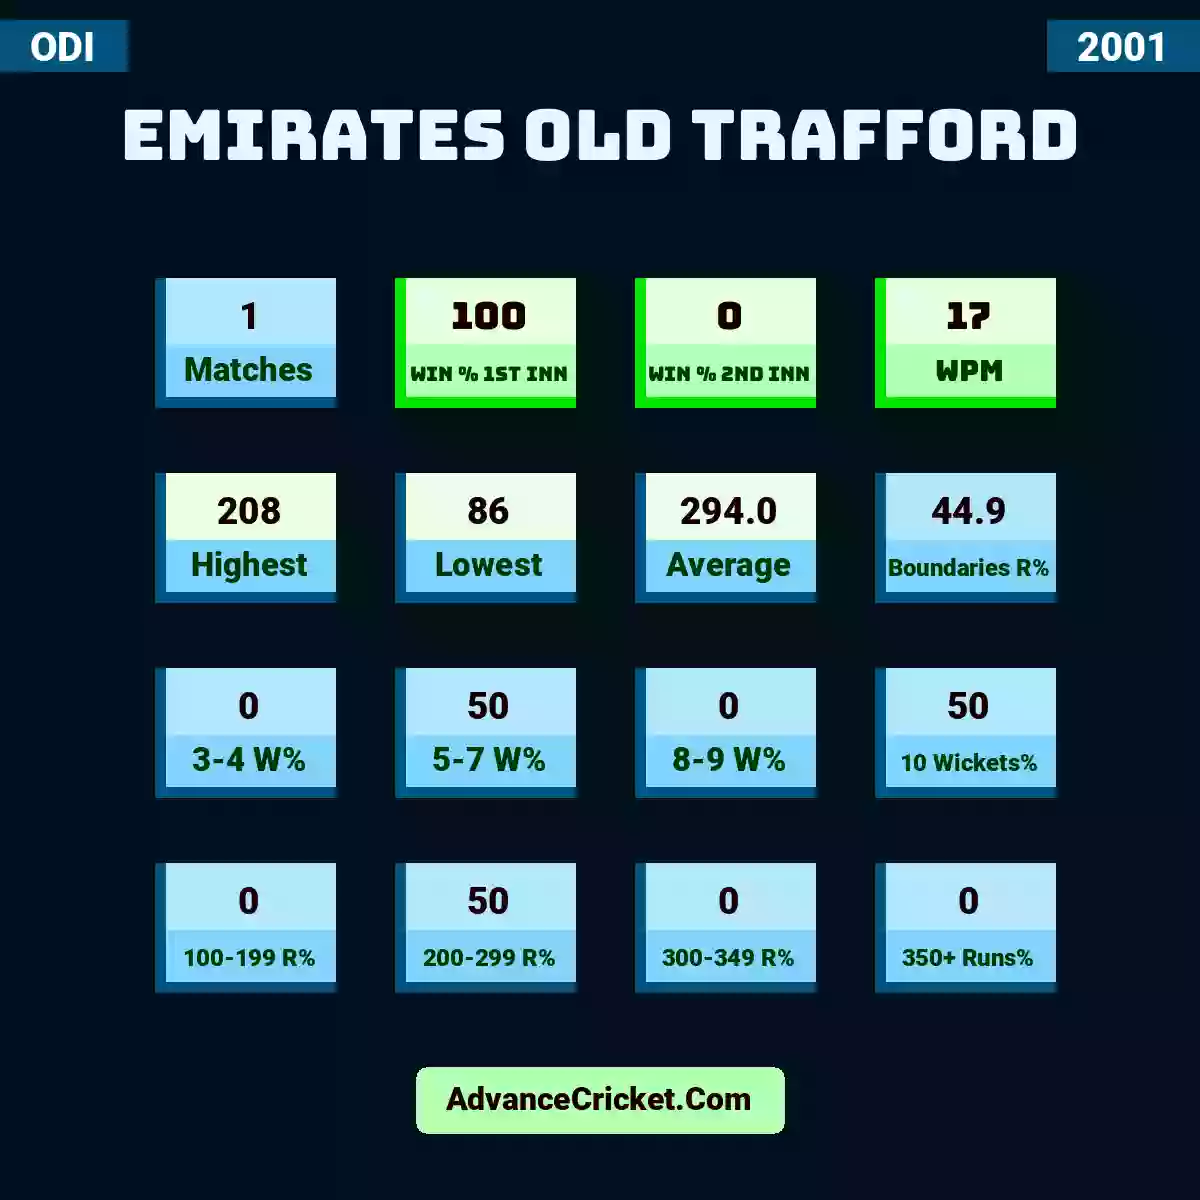 Image showing Emirates Old Trafford with Matches: 1, Win % 1st Inn: 100, Win % 2nd Inn: 0, WPM: 17, Highest: 208, Lowest: 86, Average: 294.0, Boundaries R%: 44.9, 3-4 W%: 0, 5-7 W%: 50, 8-9 W%: 0, 10 Wickets%: 50, 100-199 R%: 0, 200-299 R%: 50, 300-349 R%: 0, 350+ Runs%: 0.